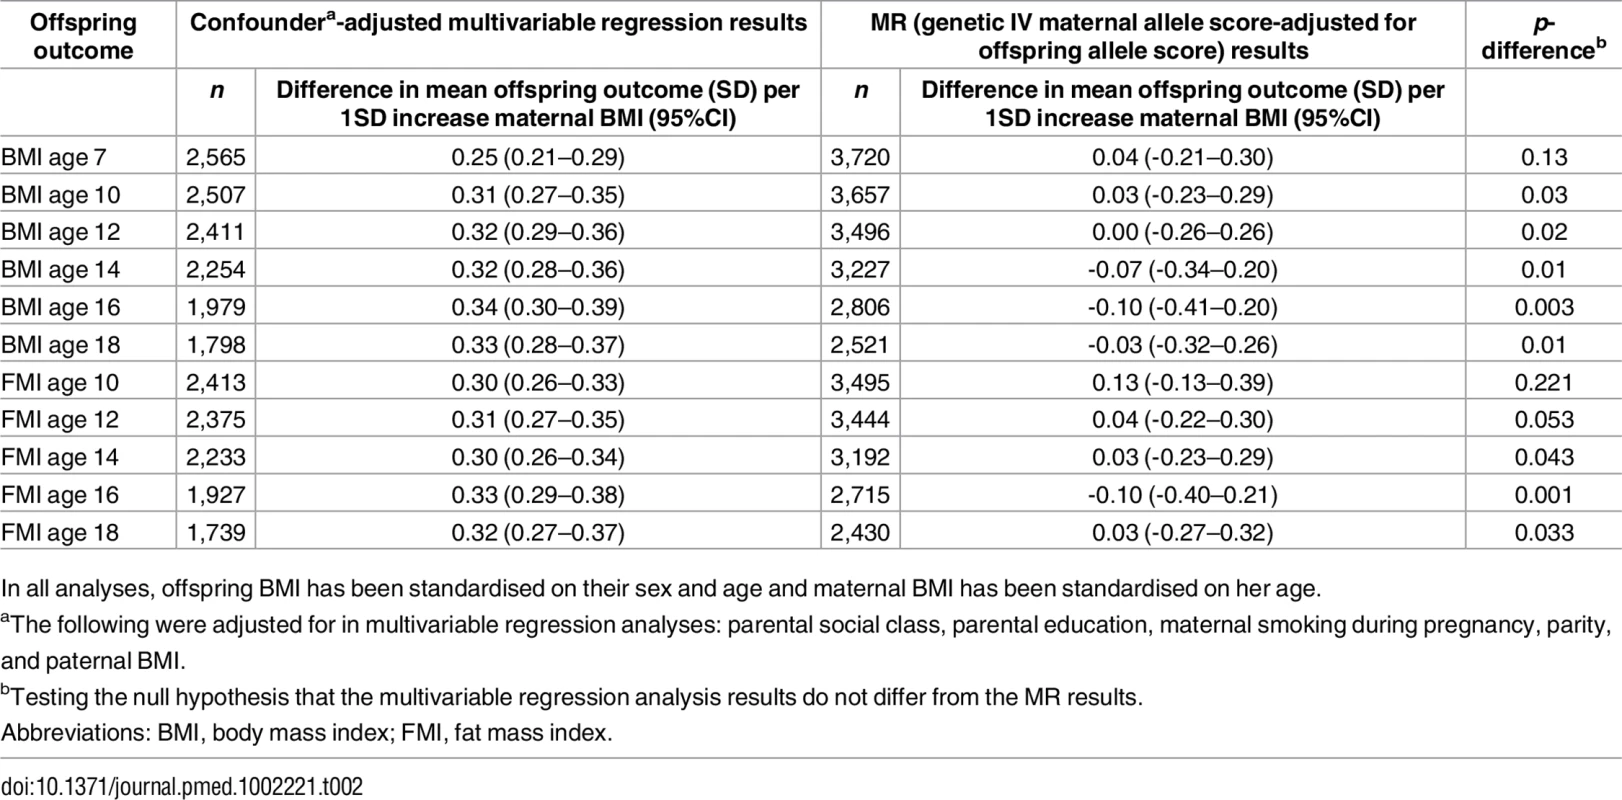 Confounder-adjusted multivariable and genetic IV (MR) associations of maternal pregnancy BMI with offspring BMI and FMI from ages 7 to 18 in ALSPAC (Discovery sample).